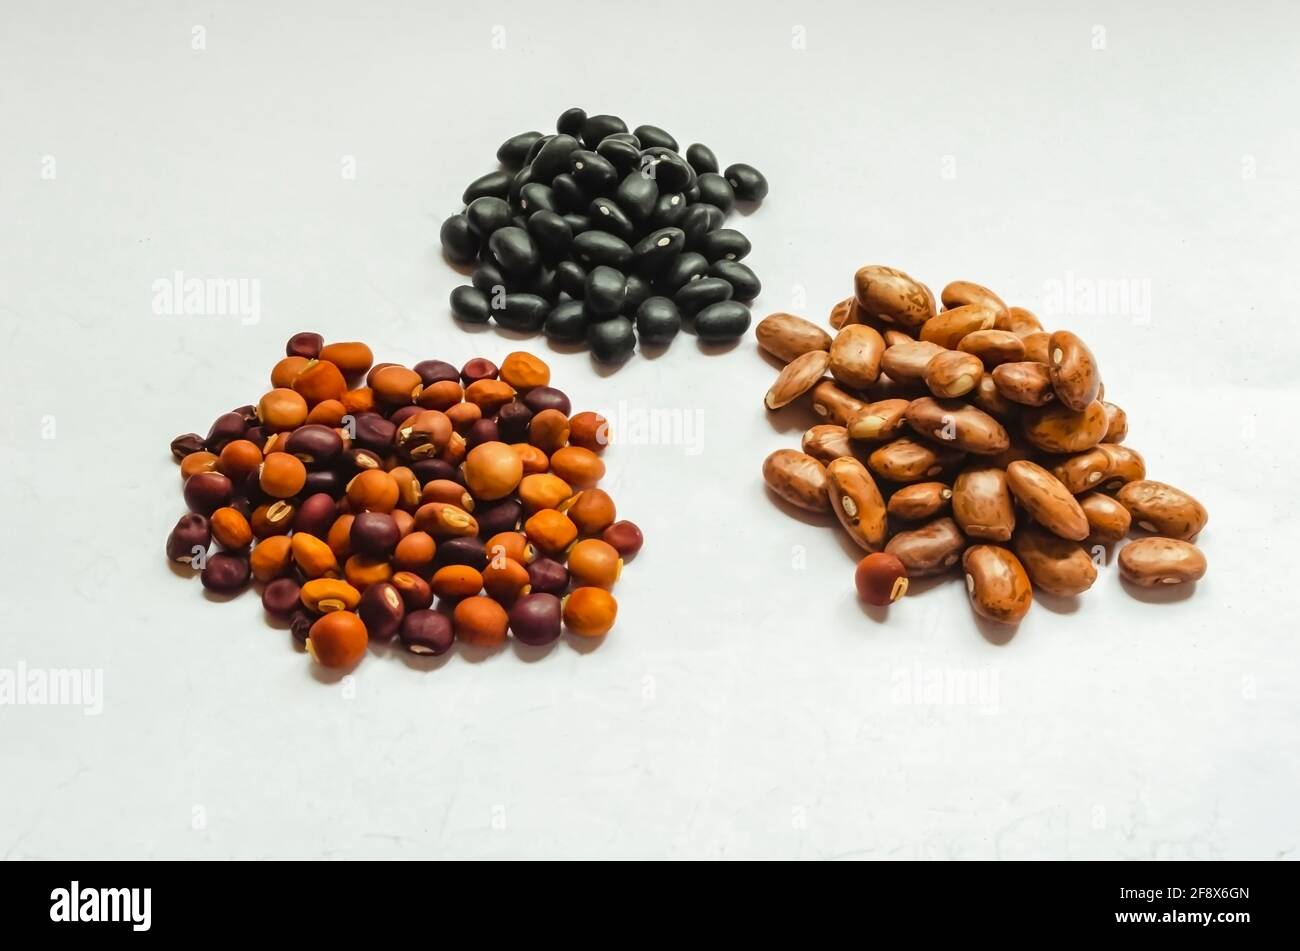 Dried Pigeon Peas, Kidney Beans And Black Beans Stock Photo